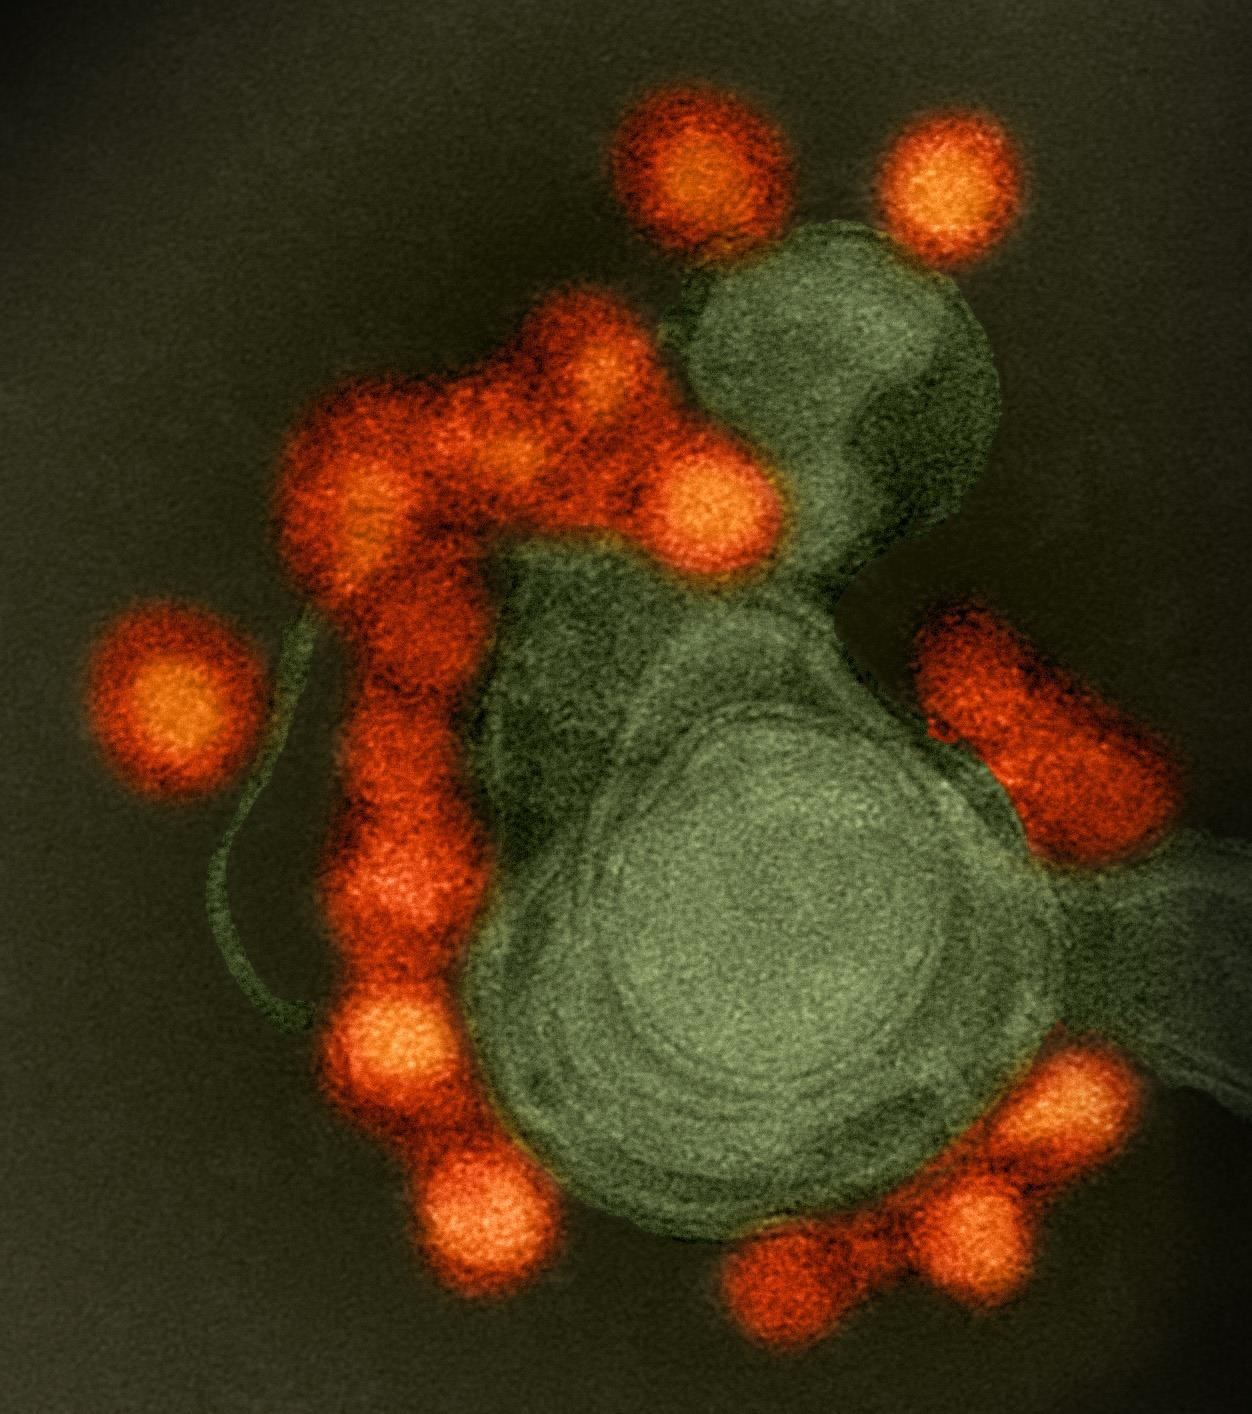 In the Ultimate Irony, Zika Virus May Cure Brain Cancer